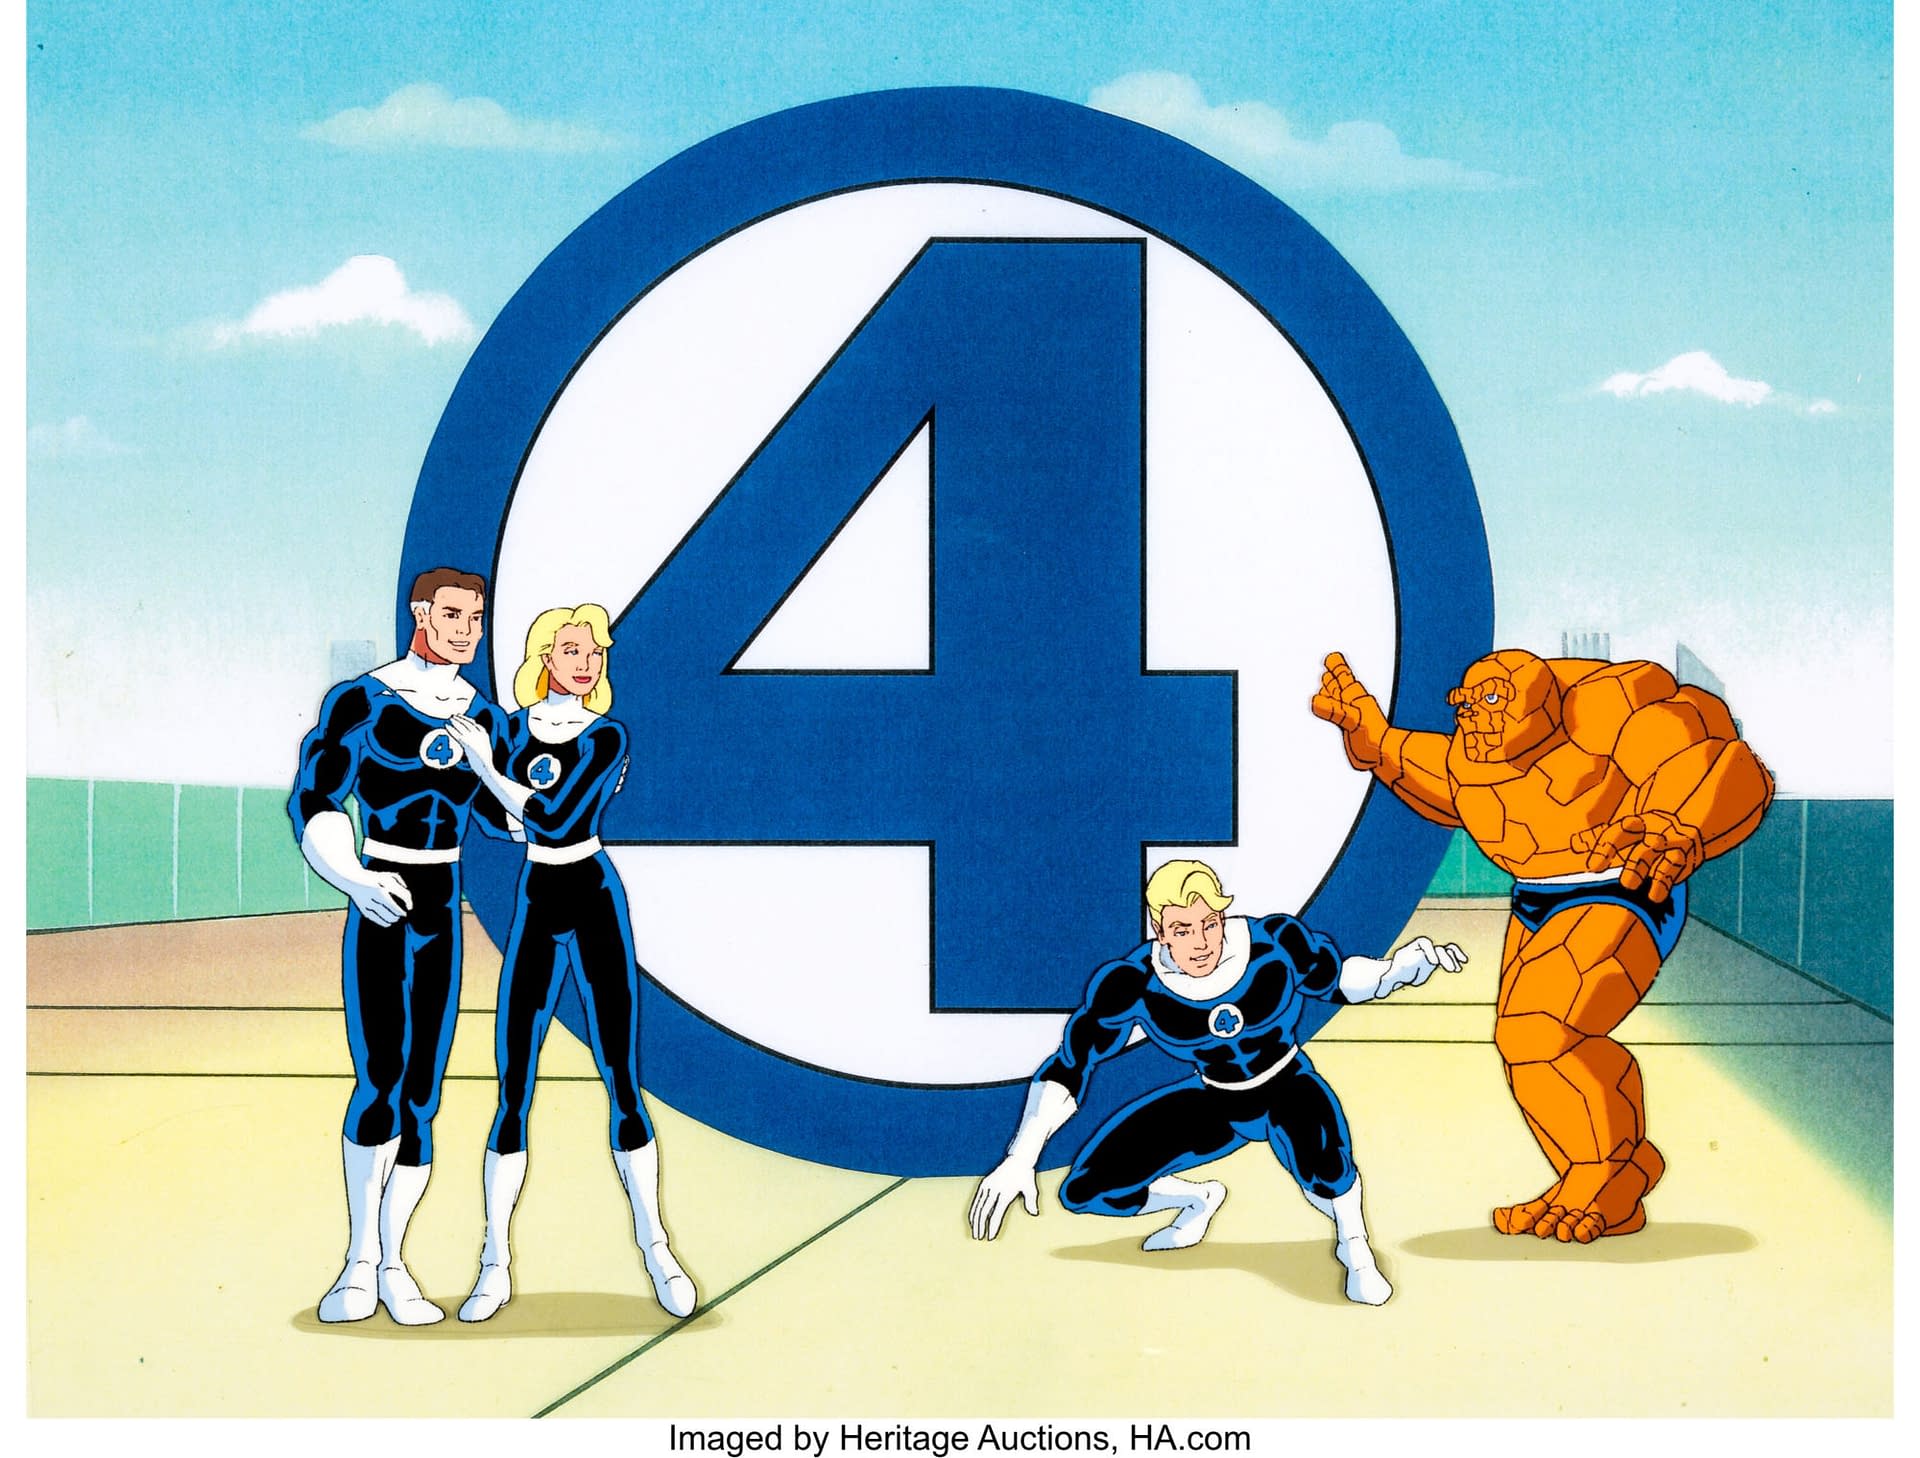 The Fantastic Four Feature in Iconic Production Cel